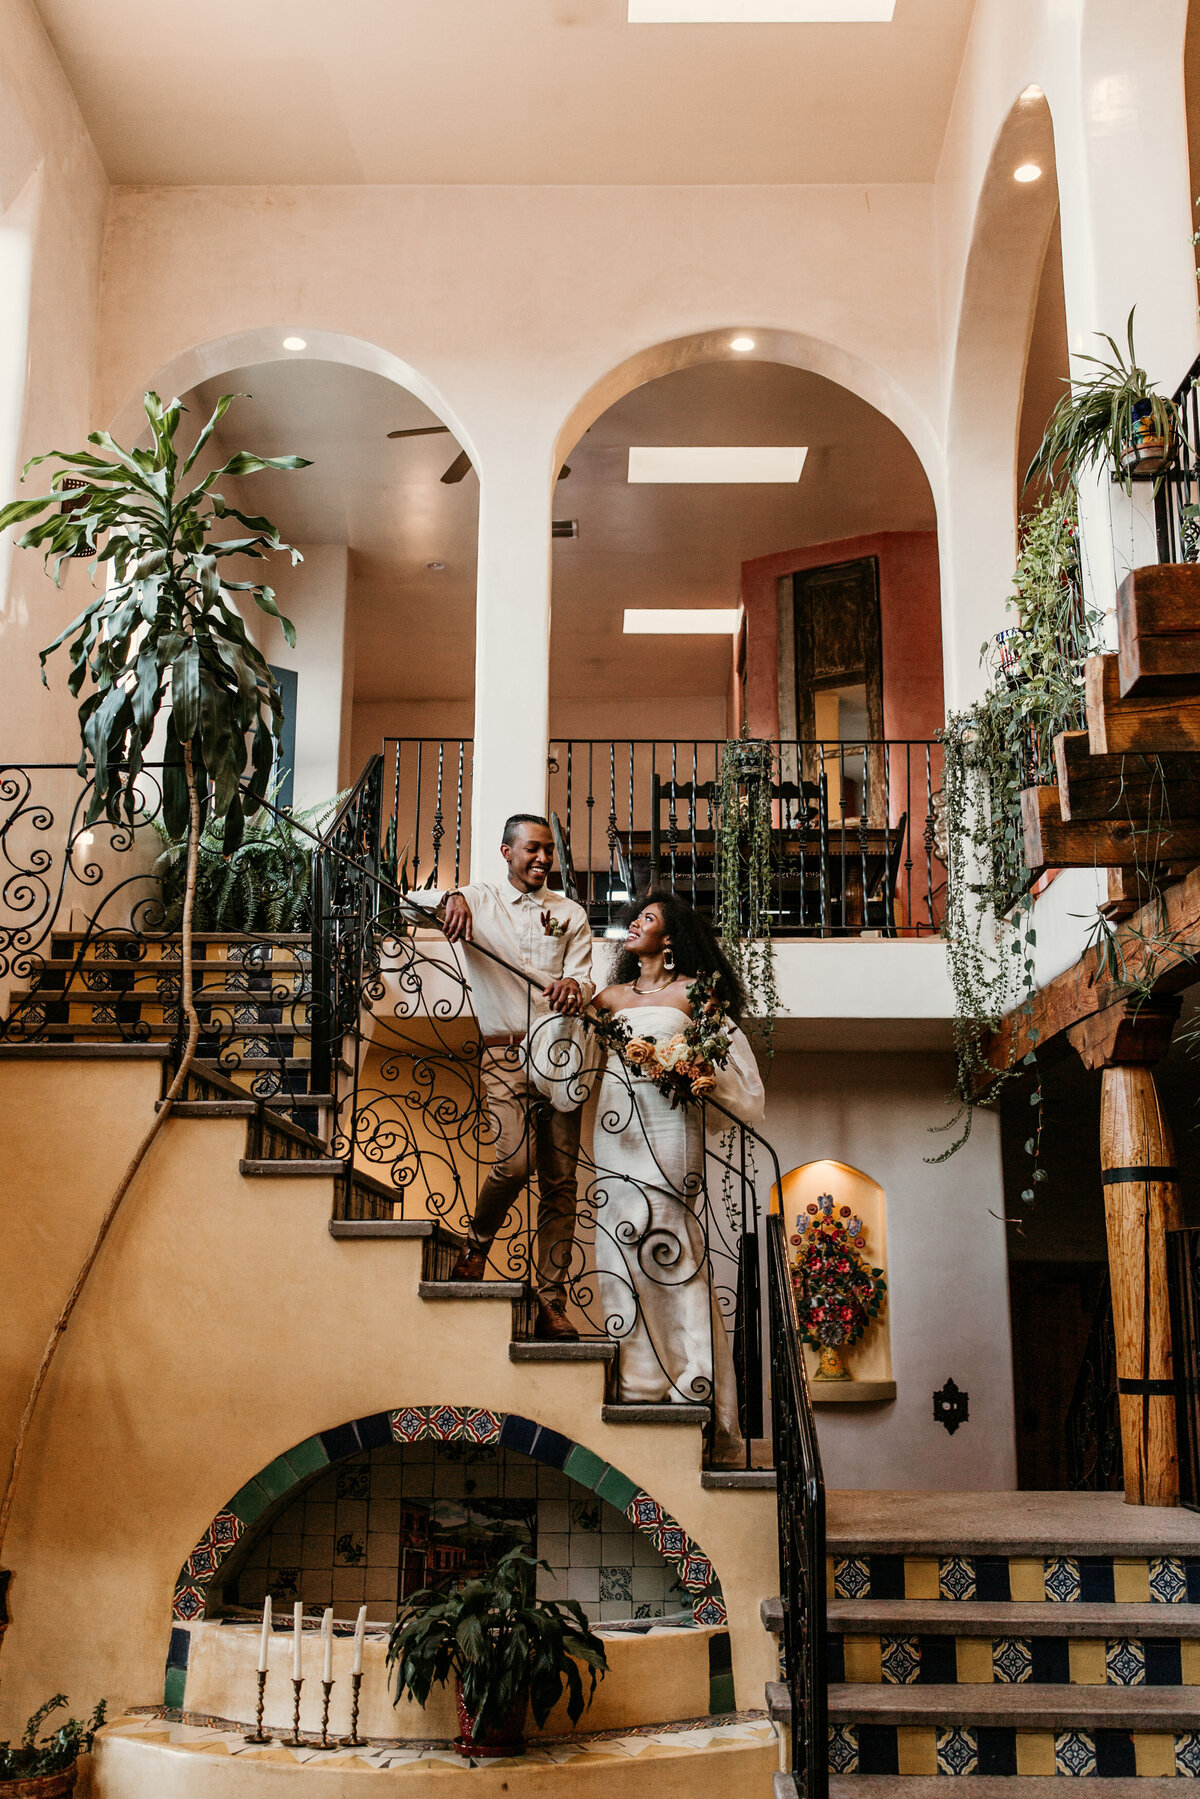 Bride and groom standing on a southwest staircase in Santa Fe venue